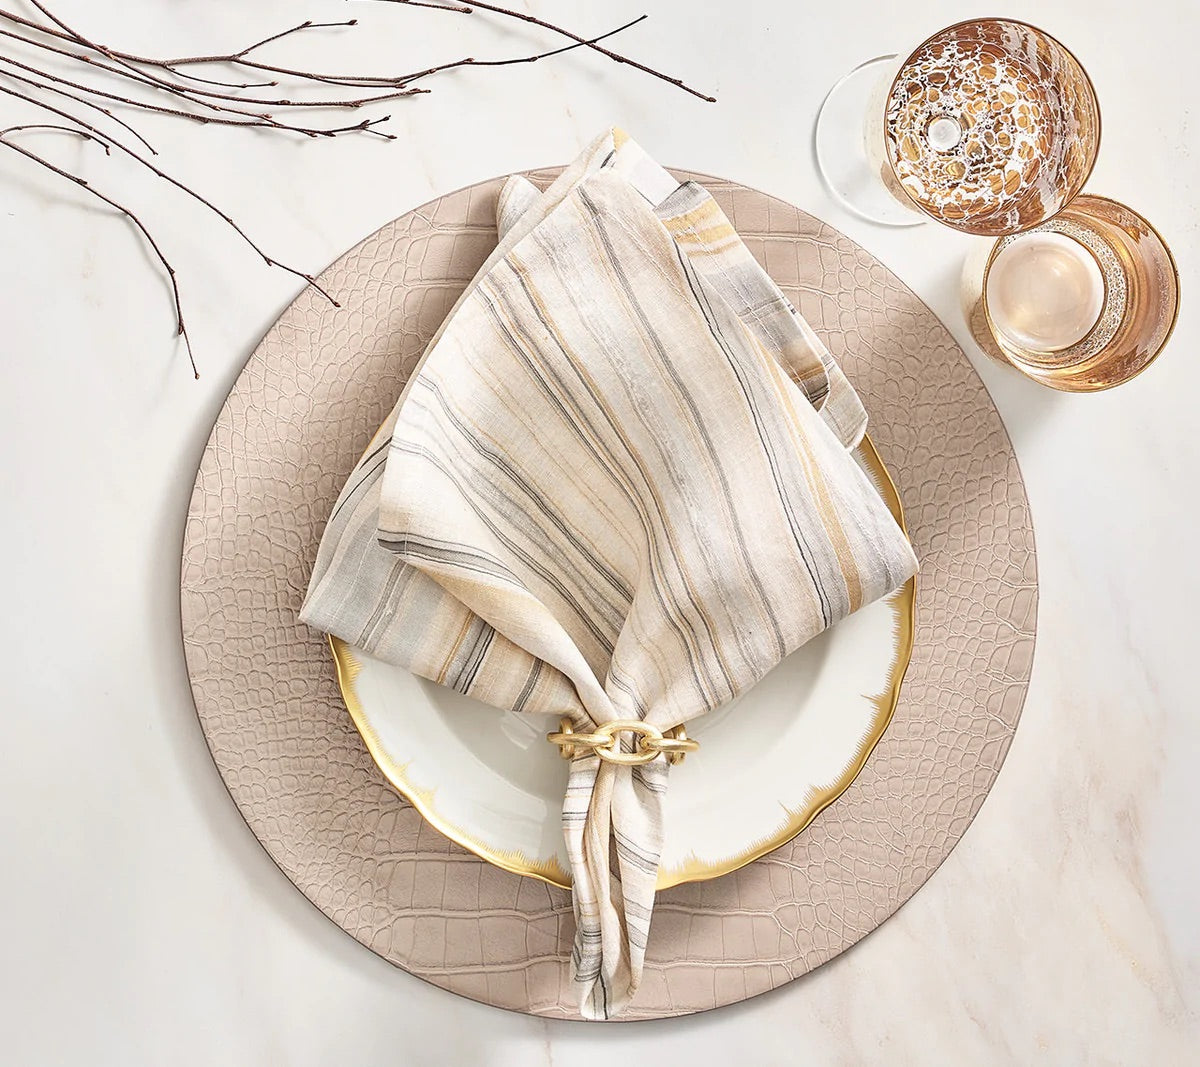 Beige/Taupe/Gray Marbled Napkin - Set of 4